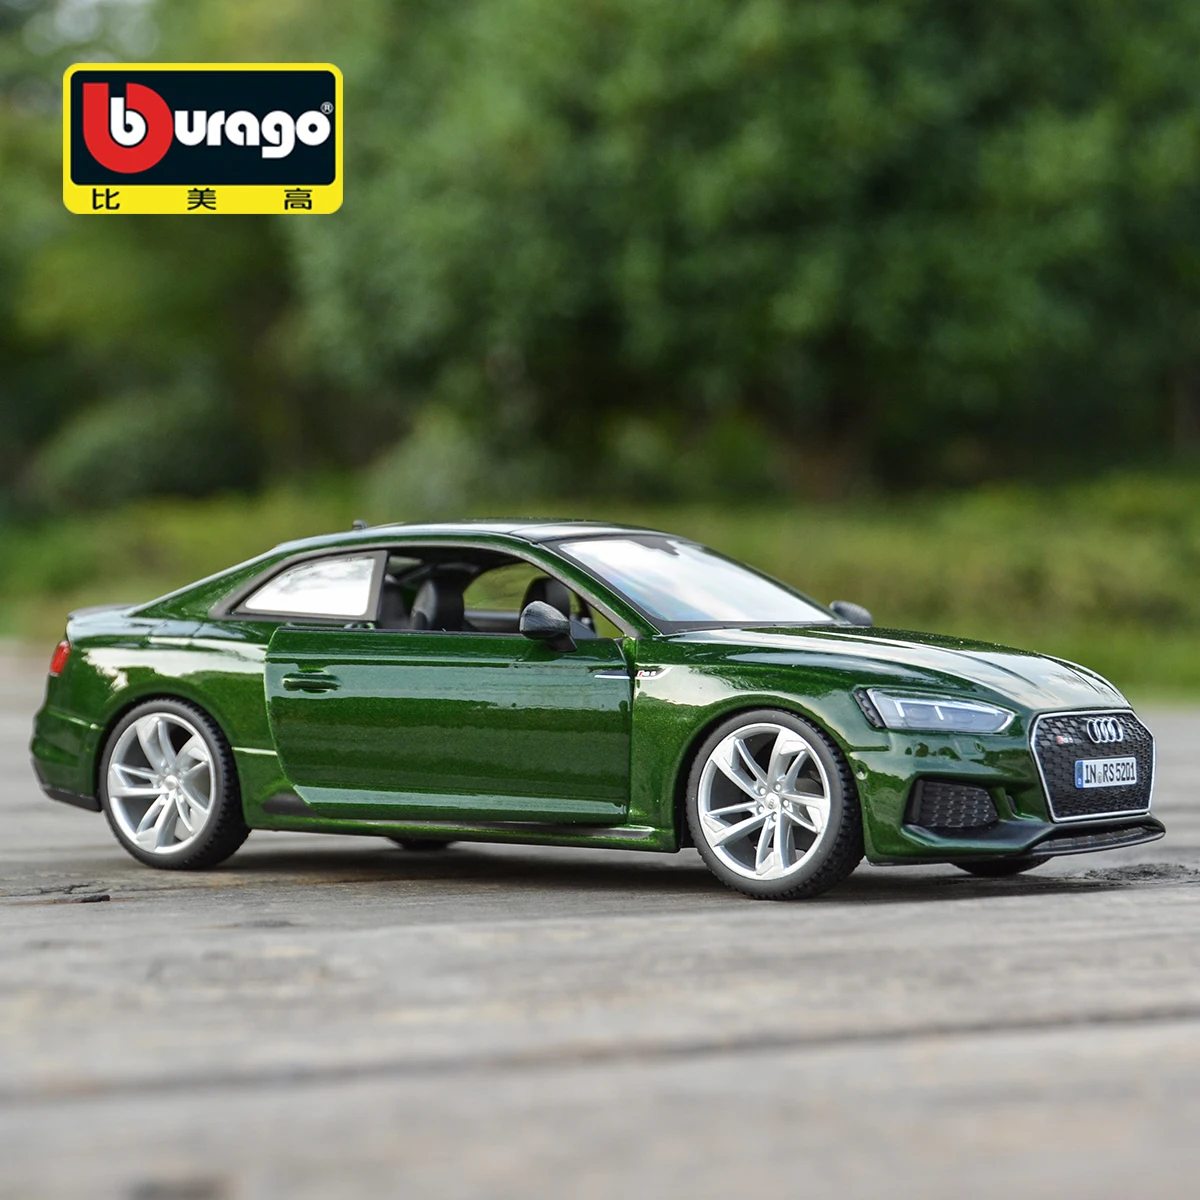 Bburago 1:24 Audi RS 5 Coupe Green alloy racing car Alloy Luxury Vehicle Diecast Pull Back Cars Model Toy Collection Gift